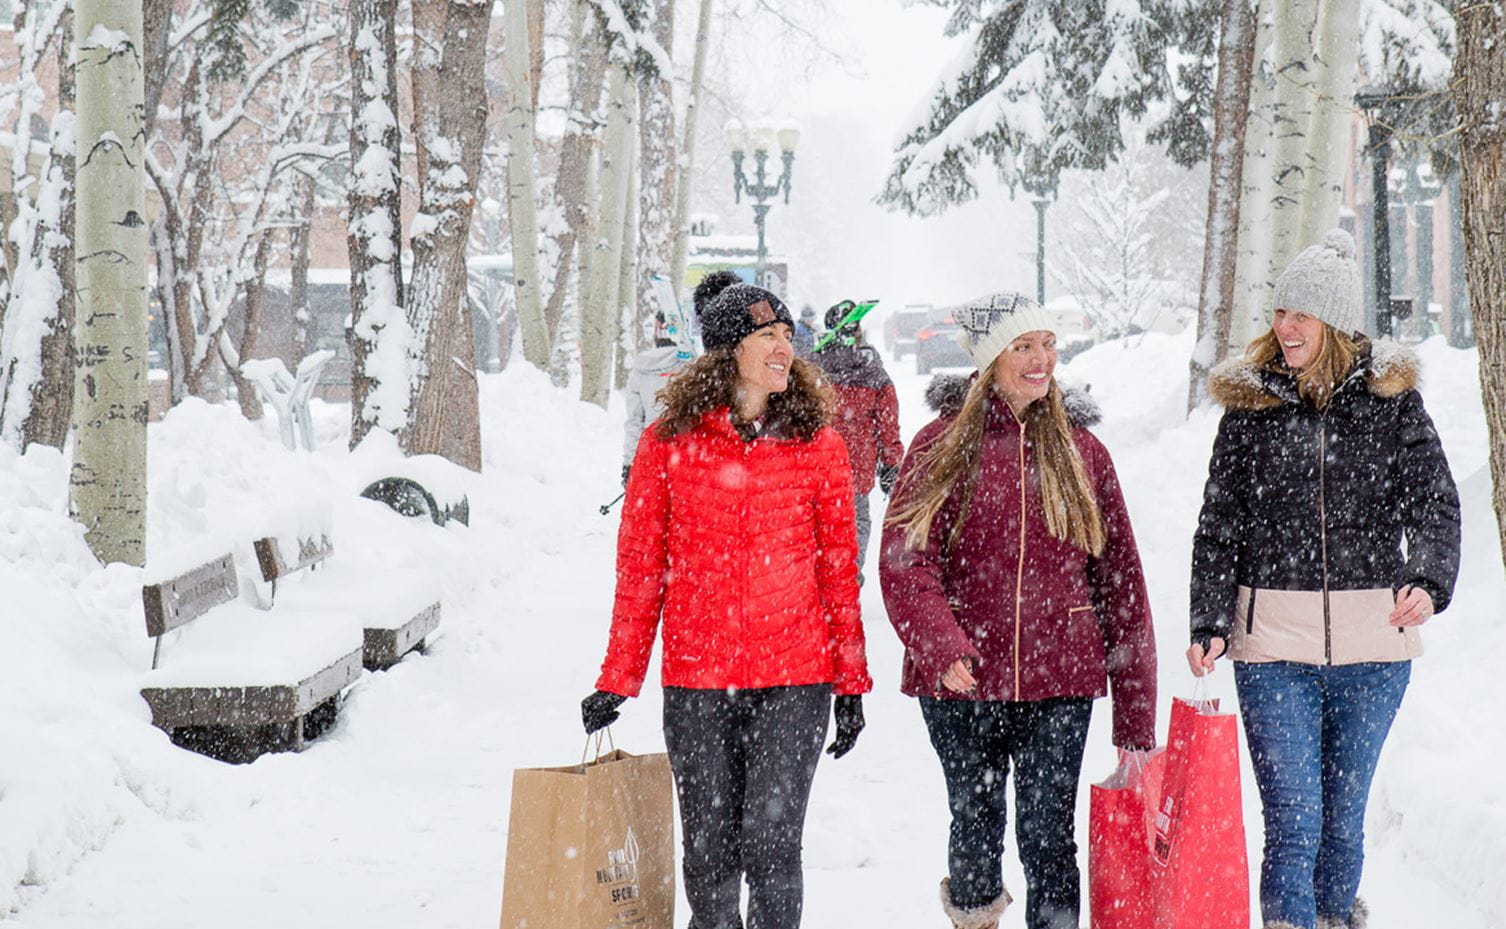 Three women walk down the streets of Aspen in winter with shopping bags